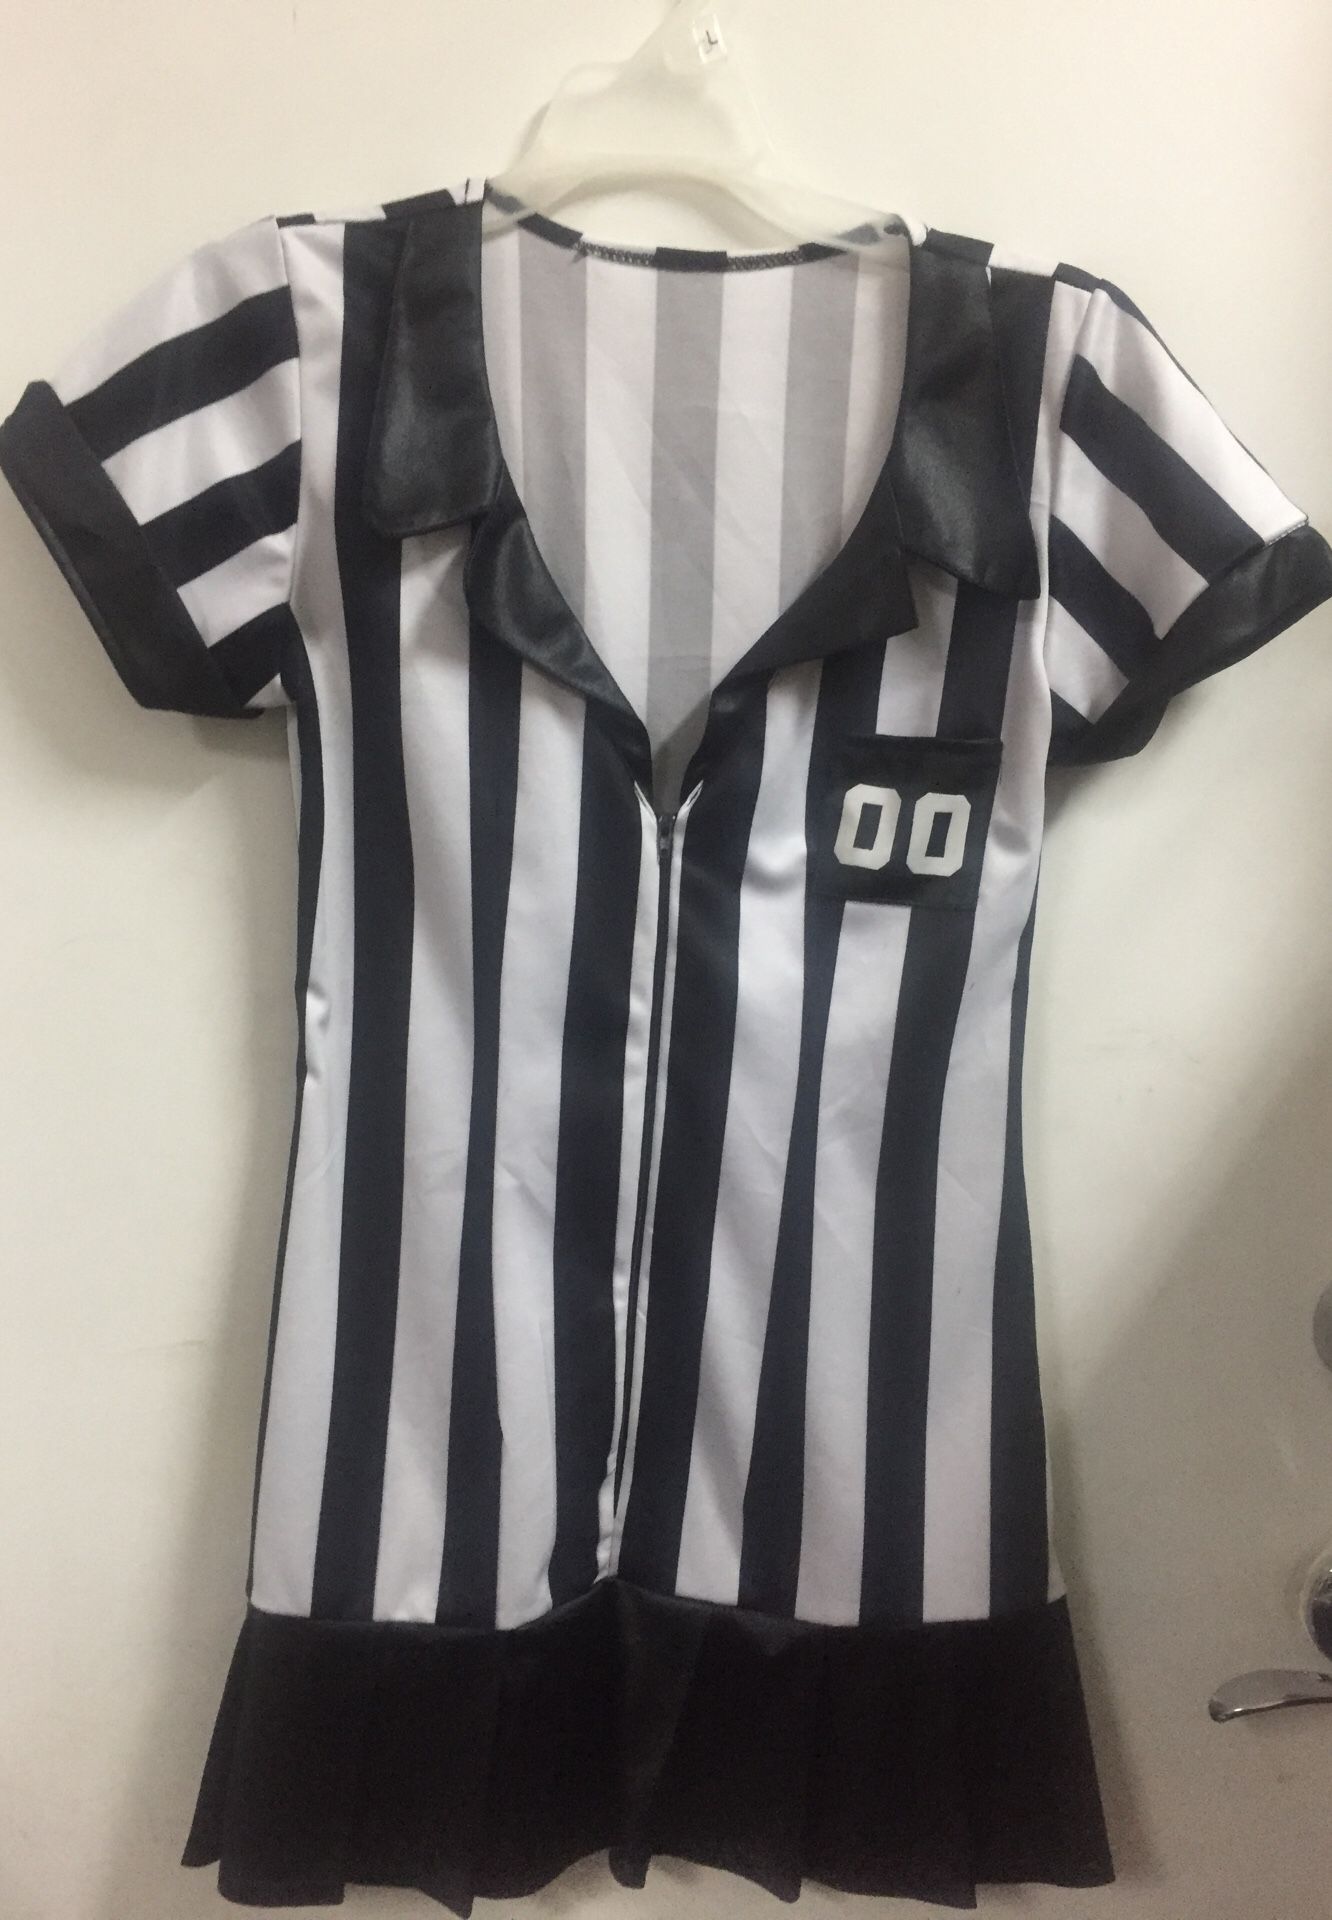 Deluxe referee dress with zip front - size small